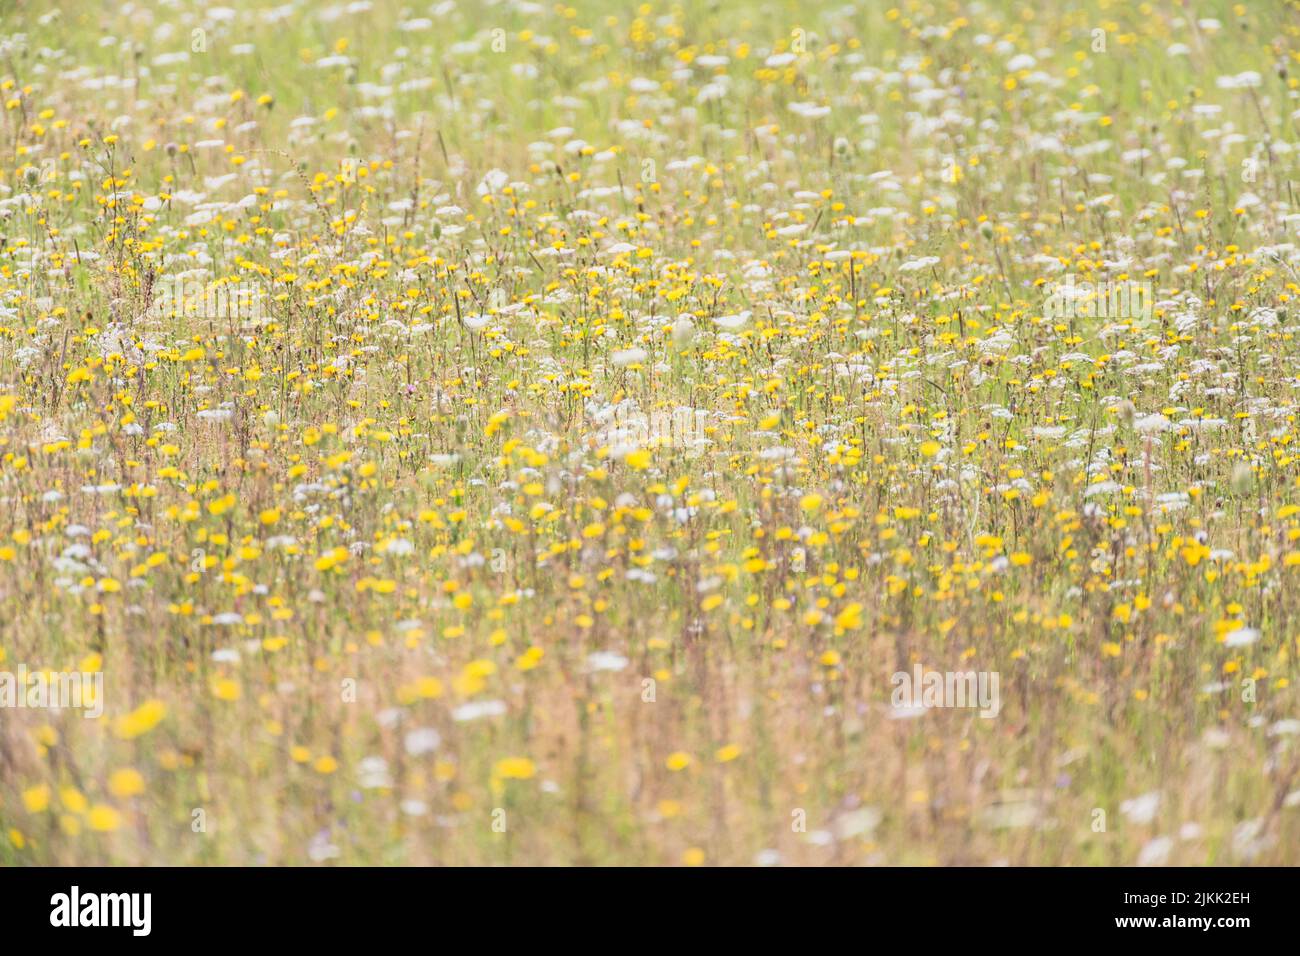 A scenic view of a field of tiny yellow and white flowers on a sunny day Stock Photo